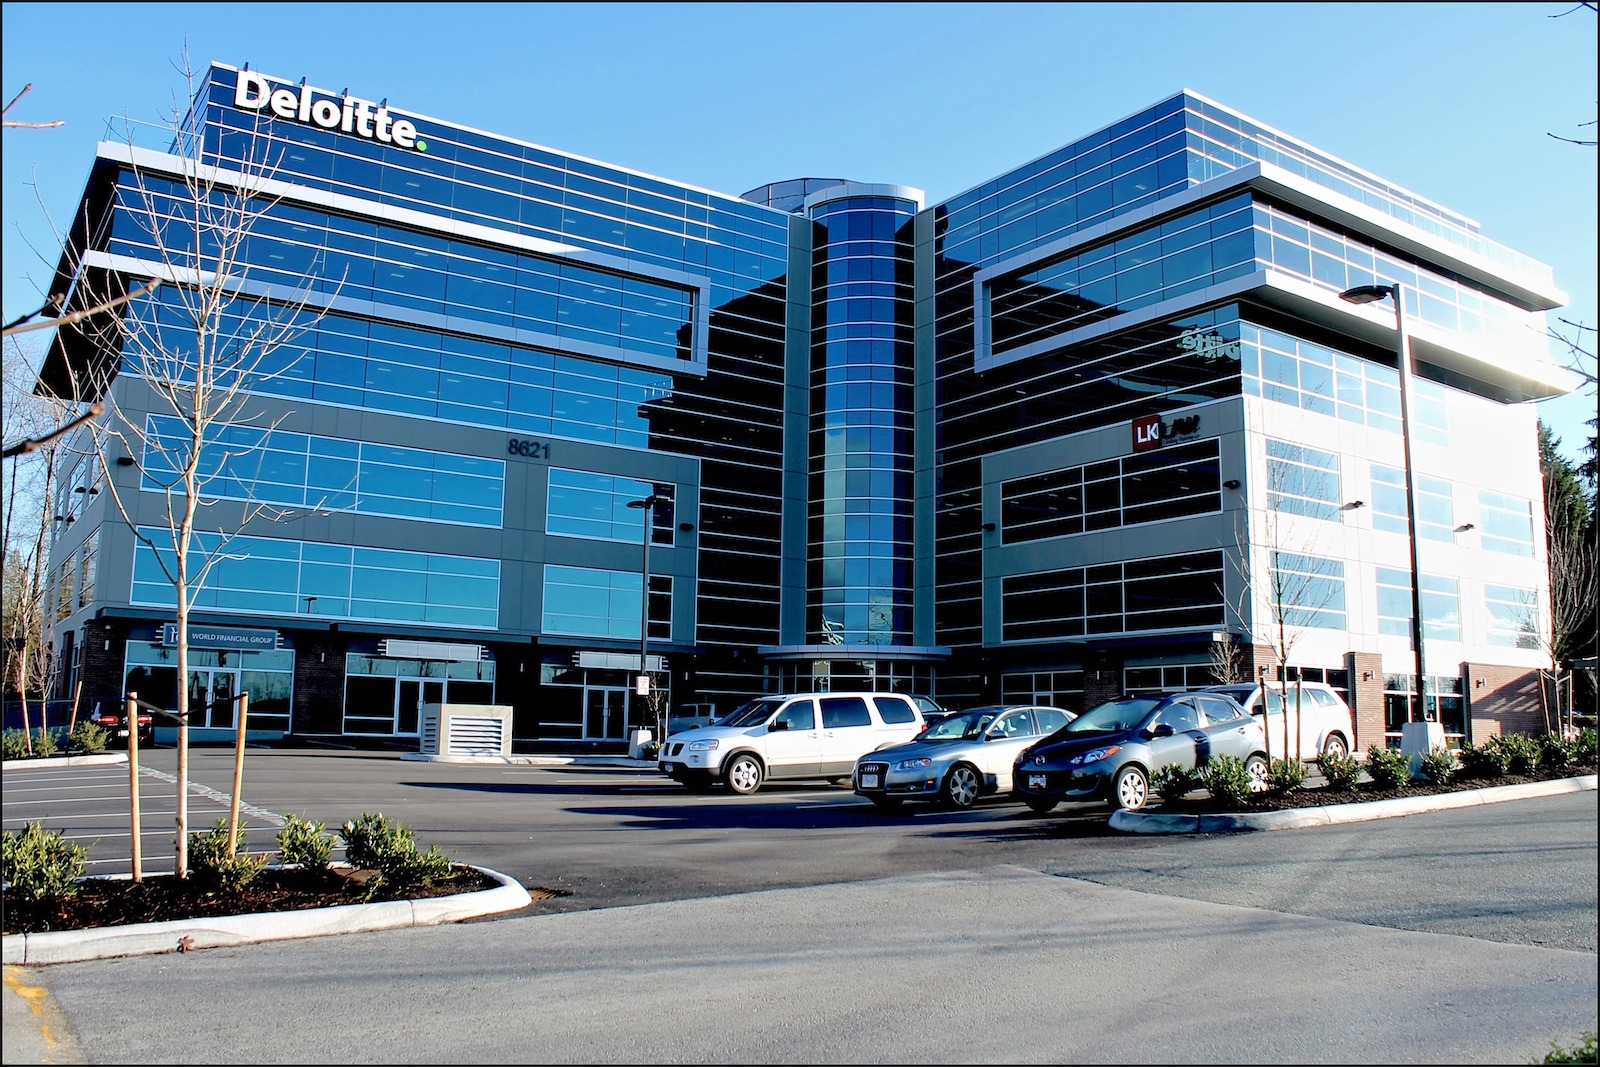 Commercial Buildings: Langley 200 Office Building
Completed 2014